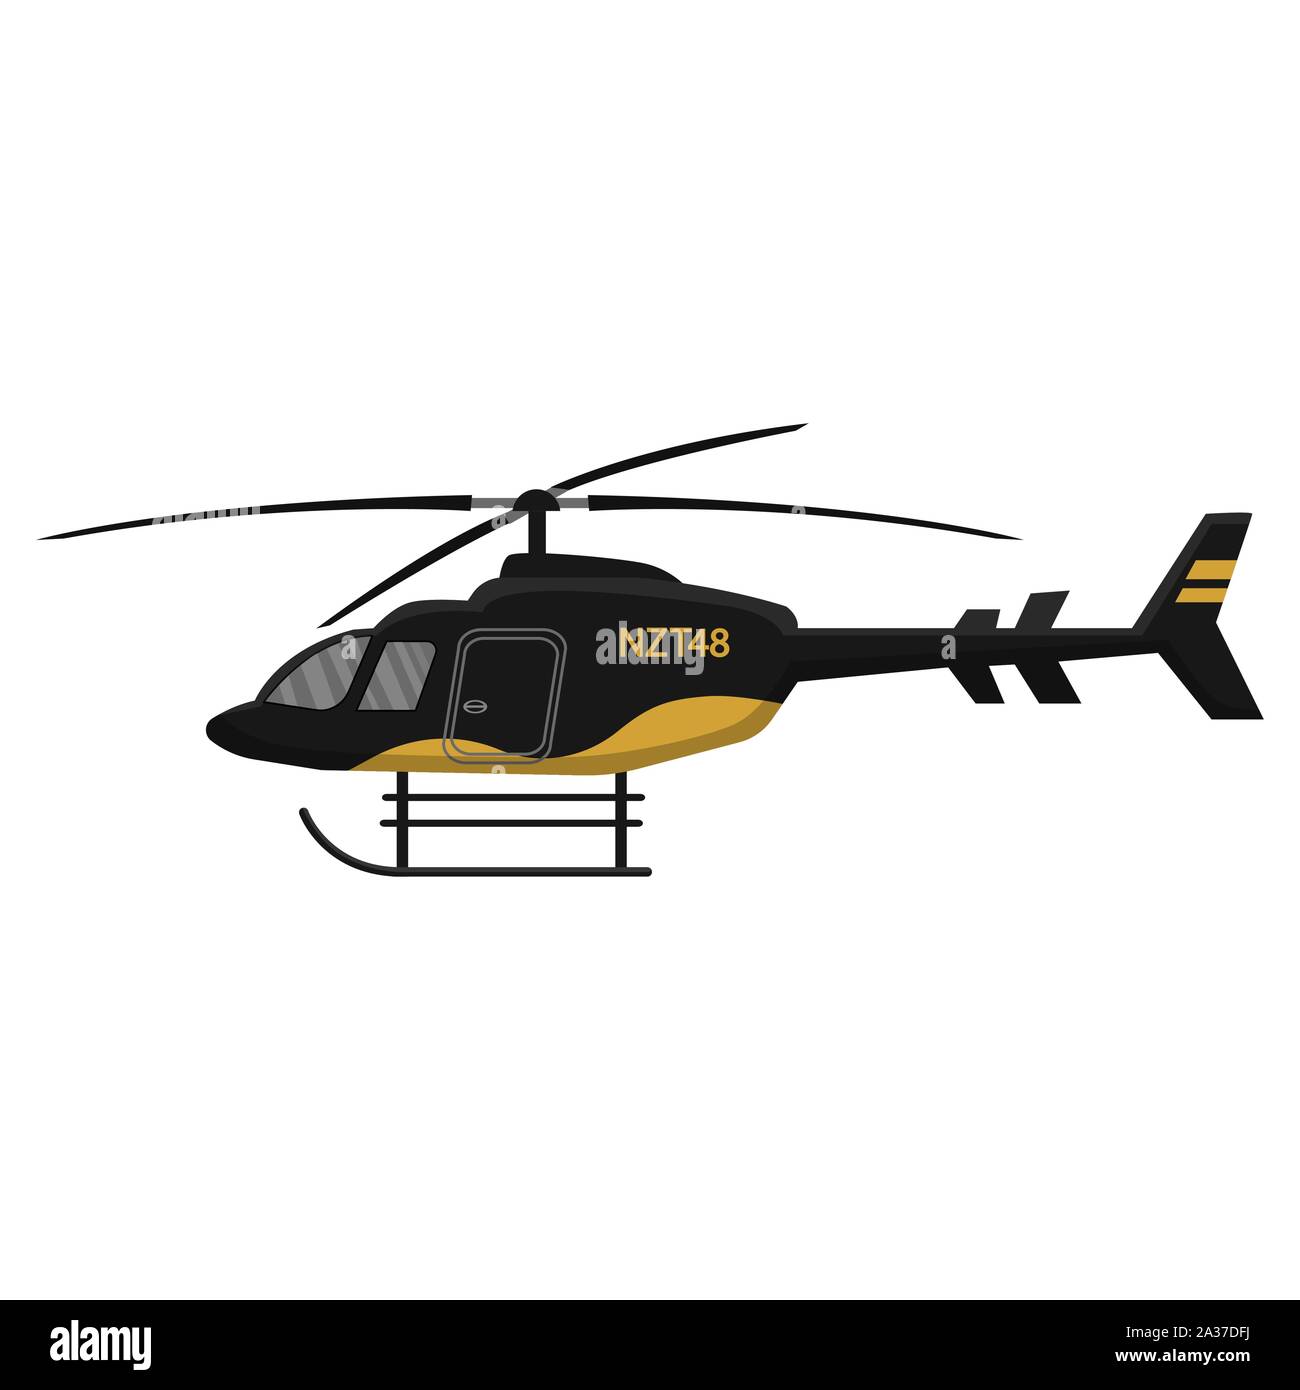 Multipurpose helicopter icon isolated on white background, air transport, aviation, vector illustration. Stock Vector